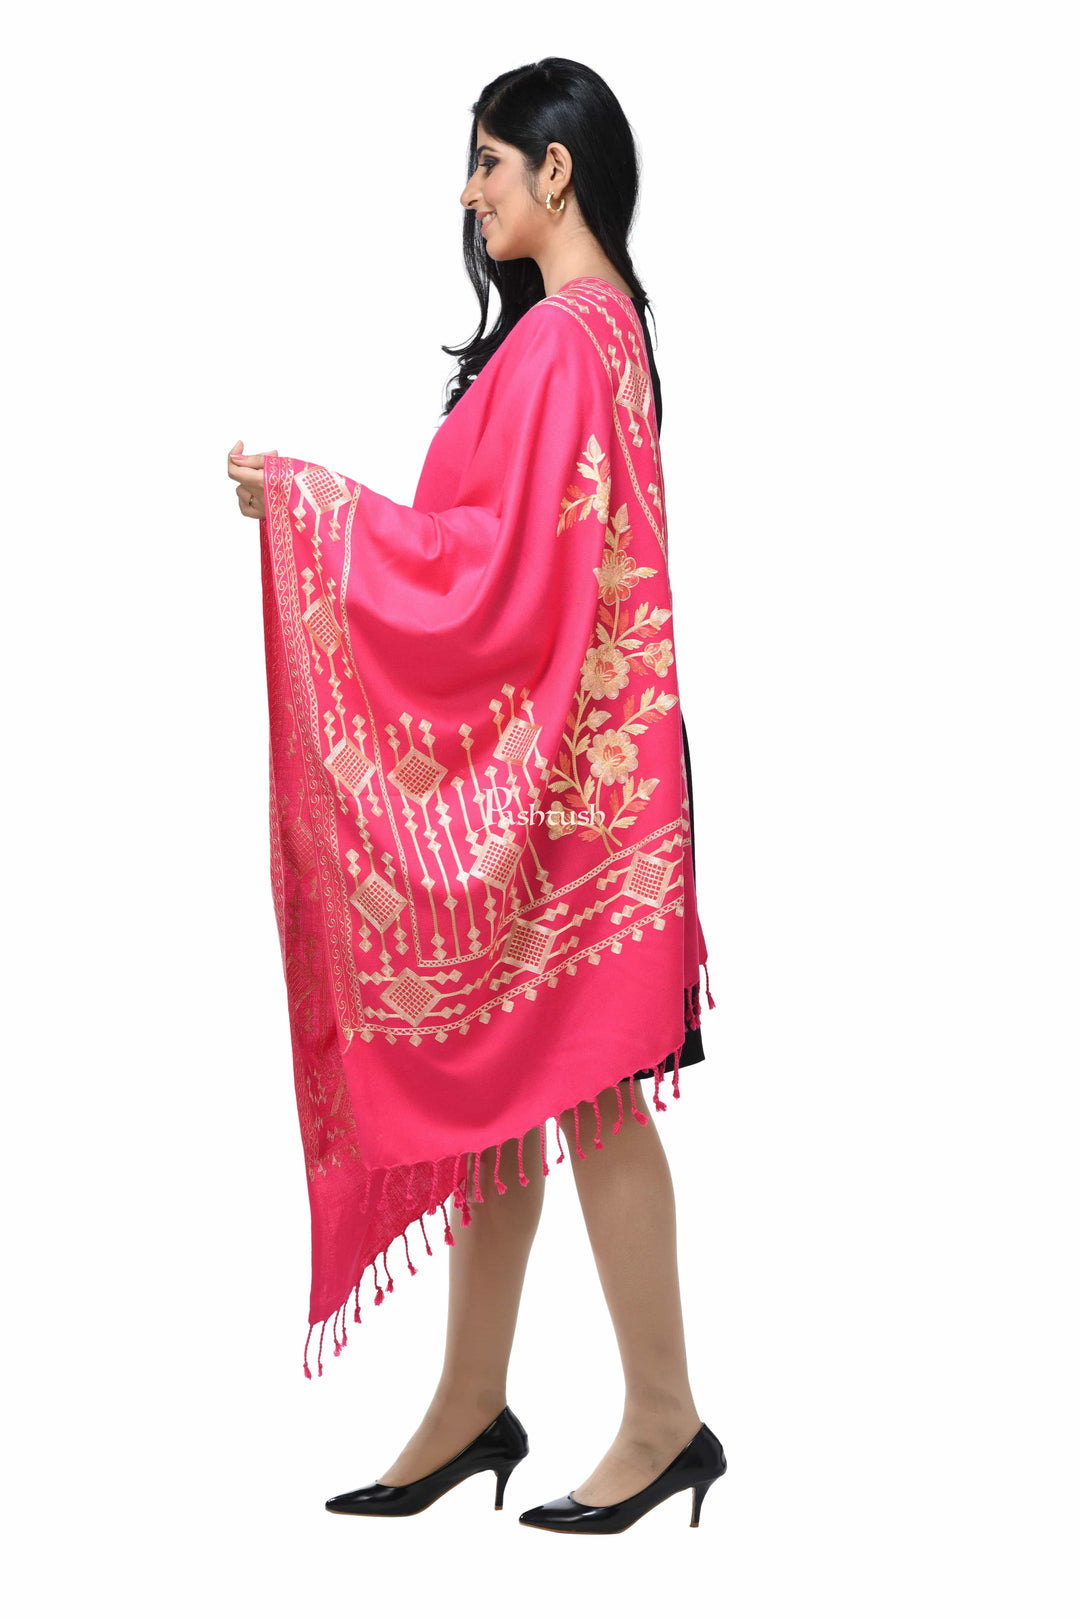 Pashwool Womens Stoles and Scarves Scarf Pashwool Womens Kashmiri Embroidery Stole, Woollen Stole, Soft And Warm, Pink